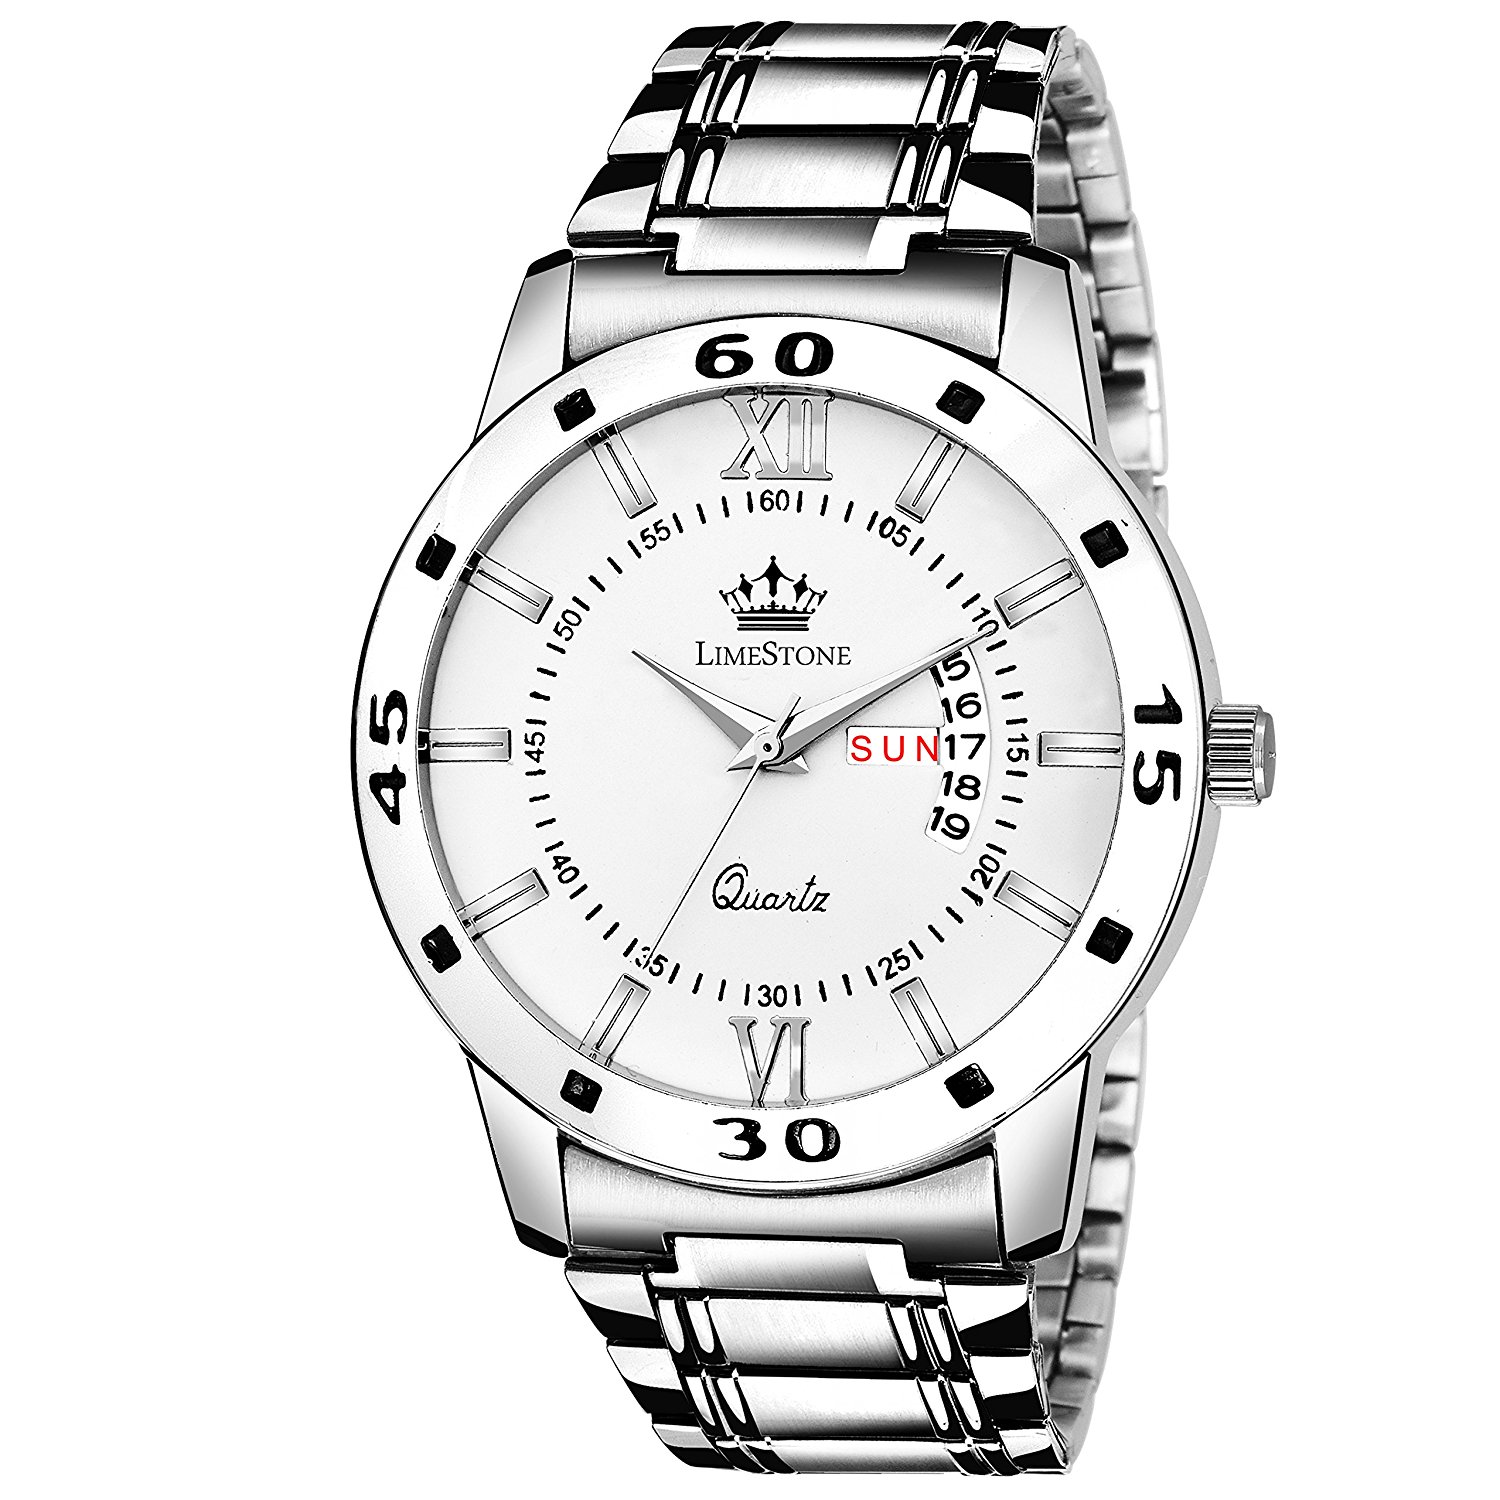 Amazon - Watches Upto 90% Discount Starts From Rs.99 + Rs.50 Cashback on Rs.250